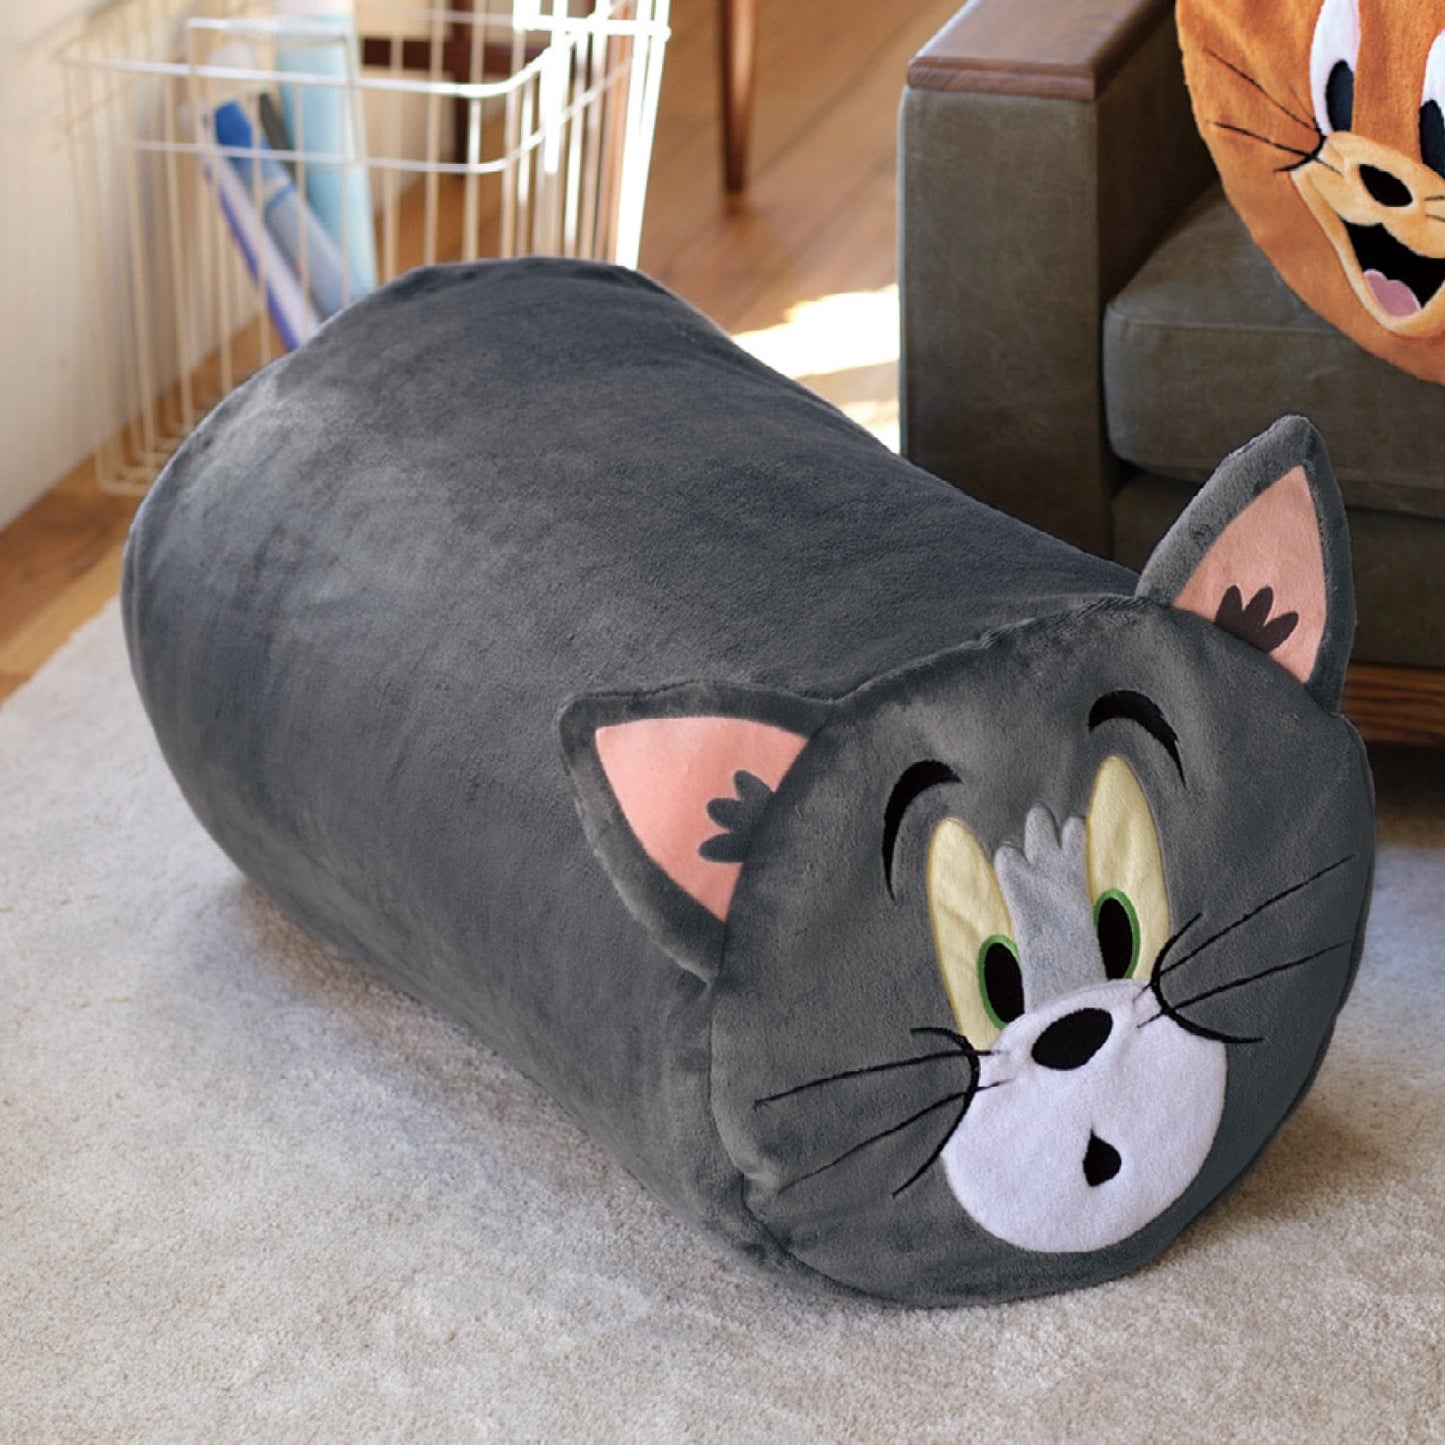  Tom&Jerry quilt storage bag (can be used for storage) 